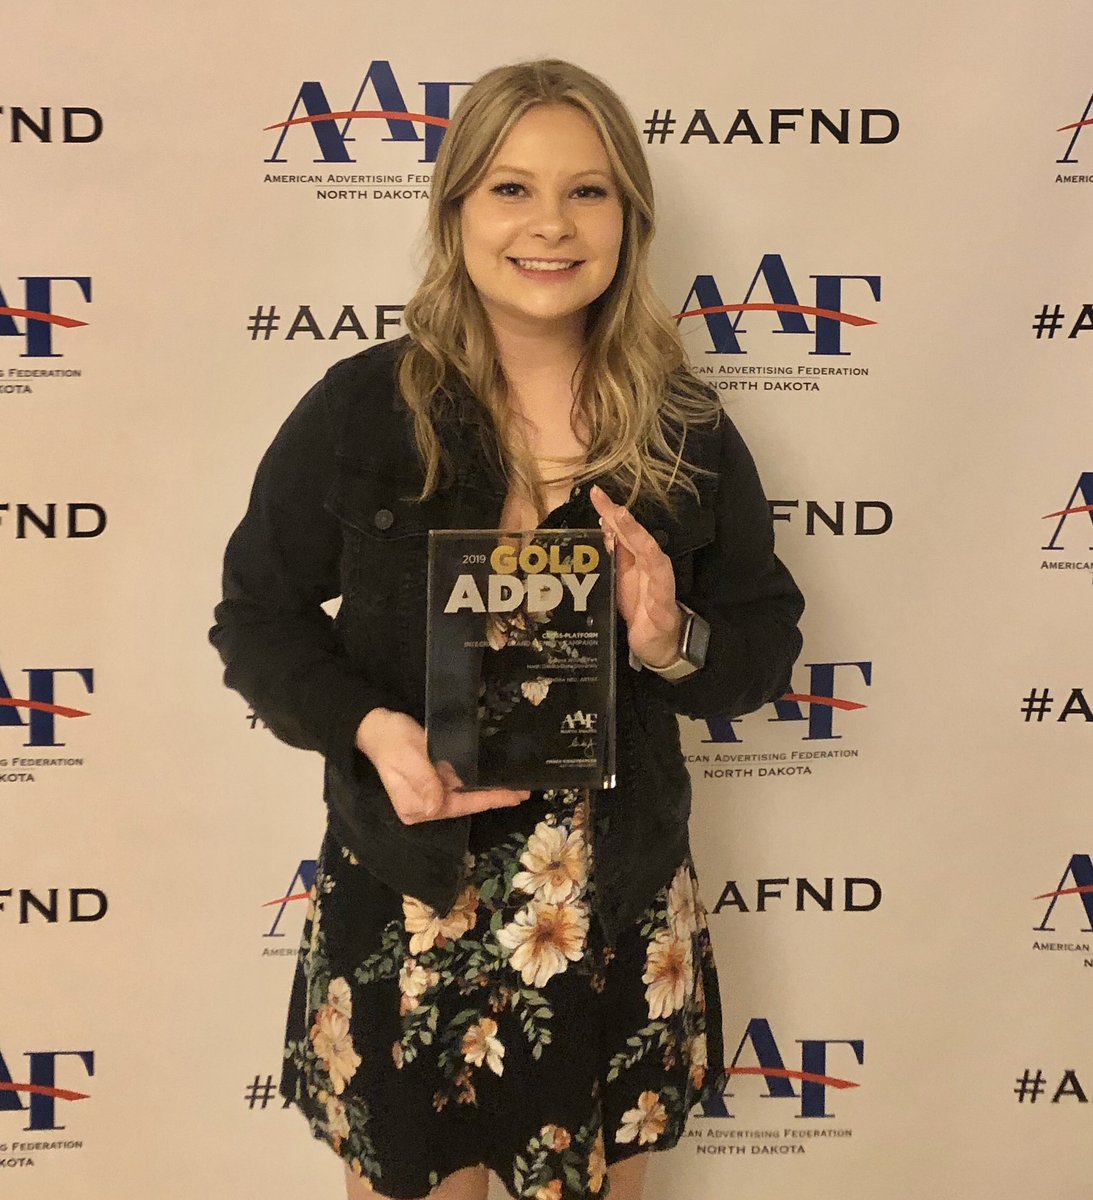 What a fun night at the @AAFND Advertising Awards! I am honored to have been awarded a Gold Addy award. #addyawards